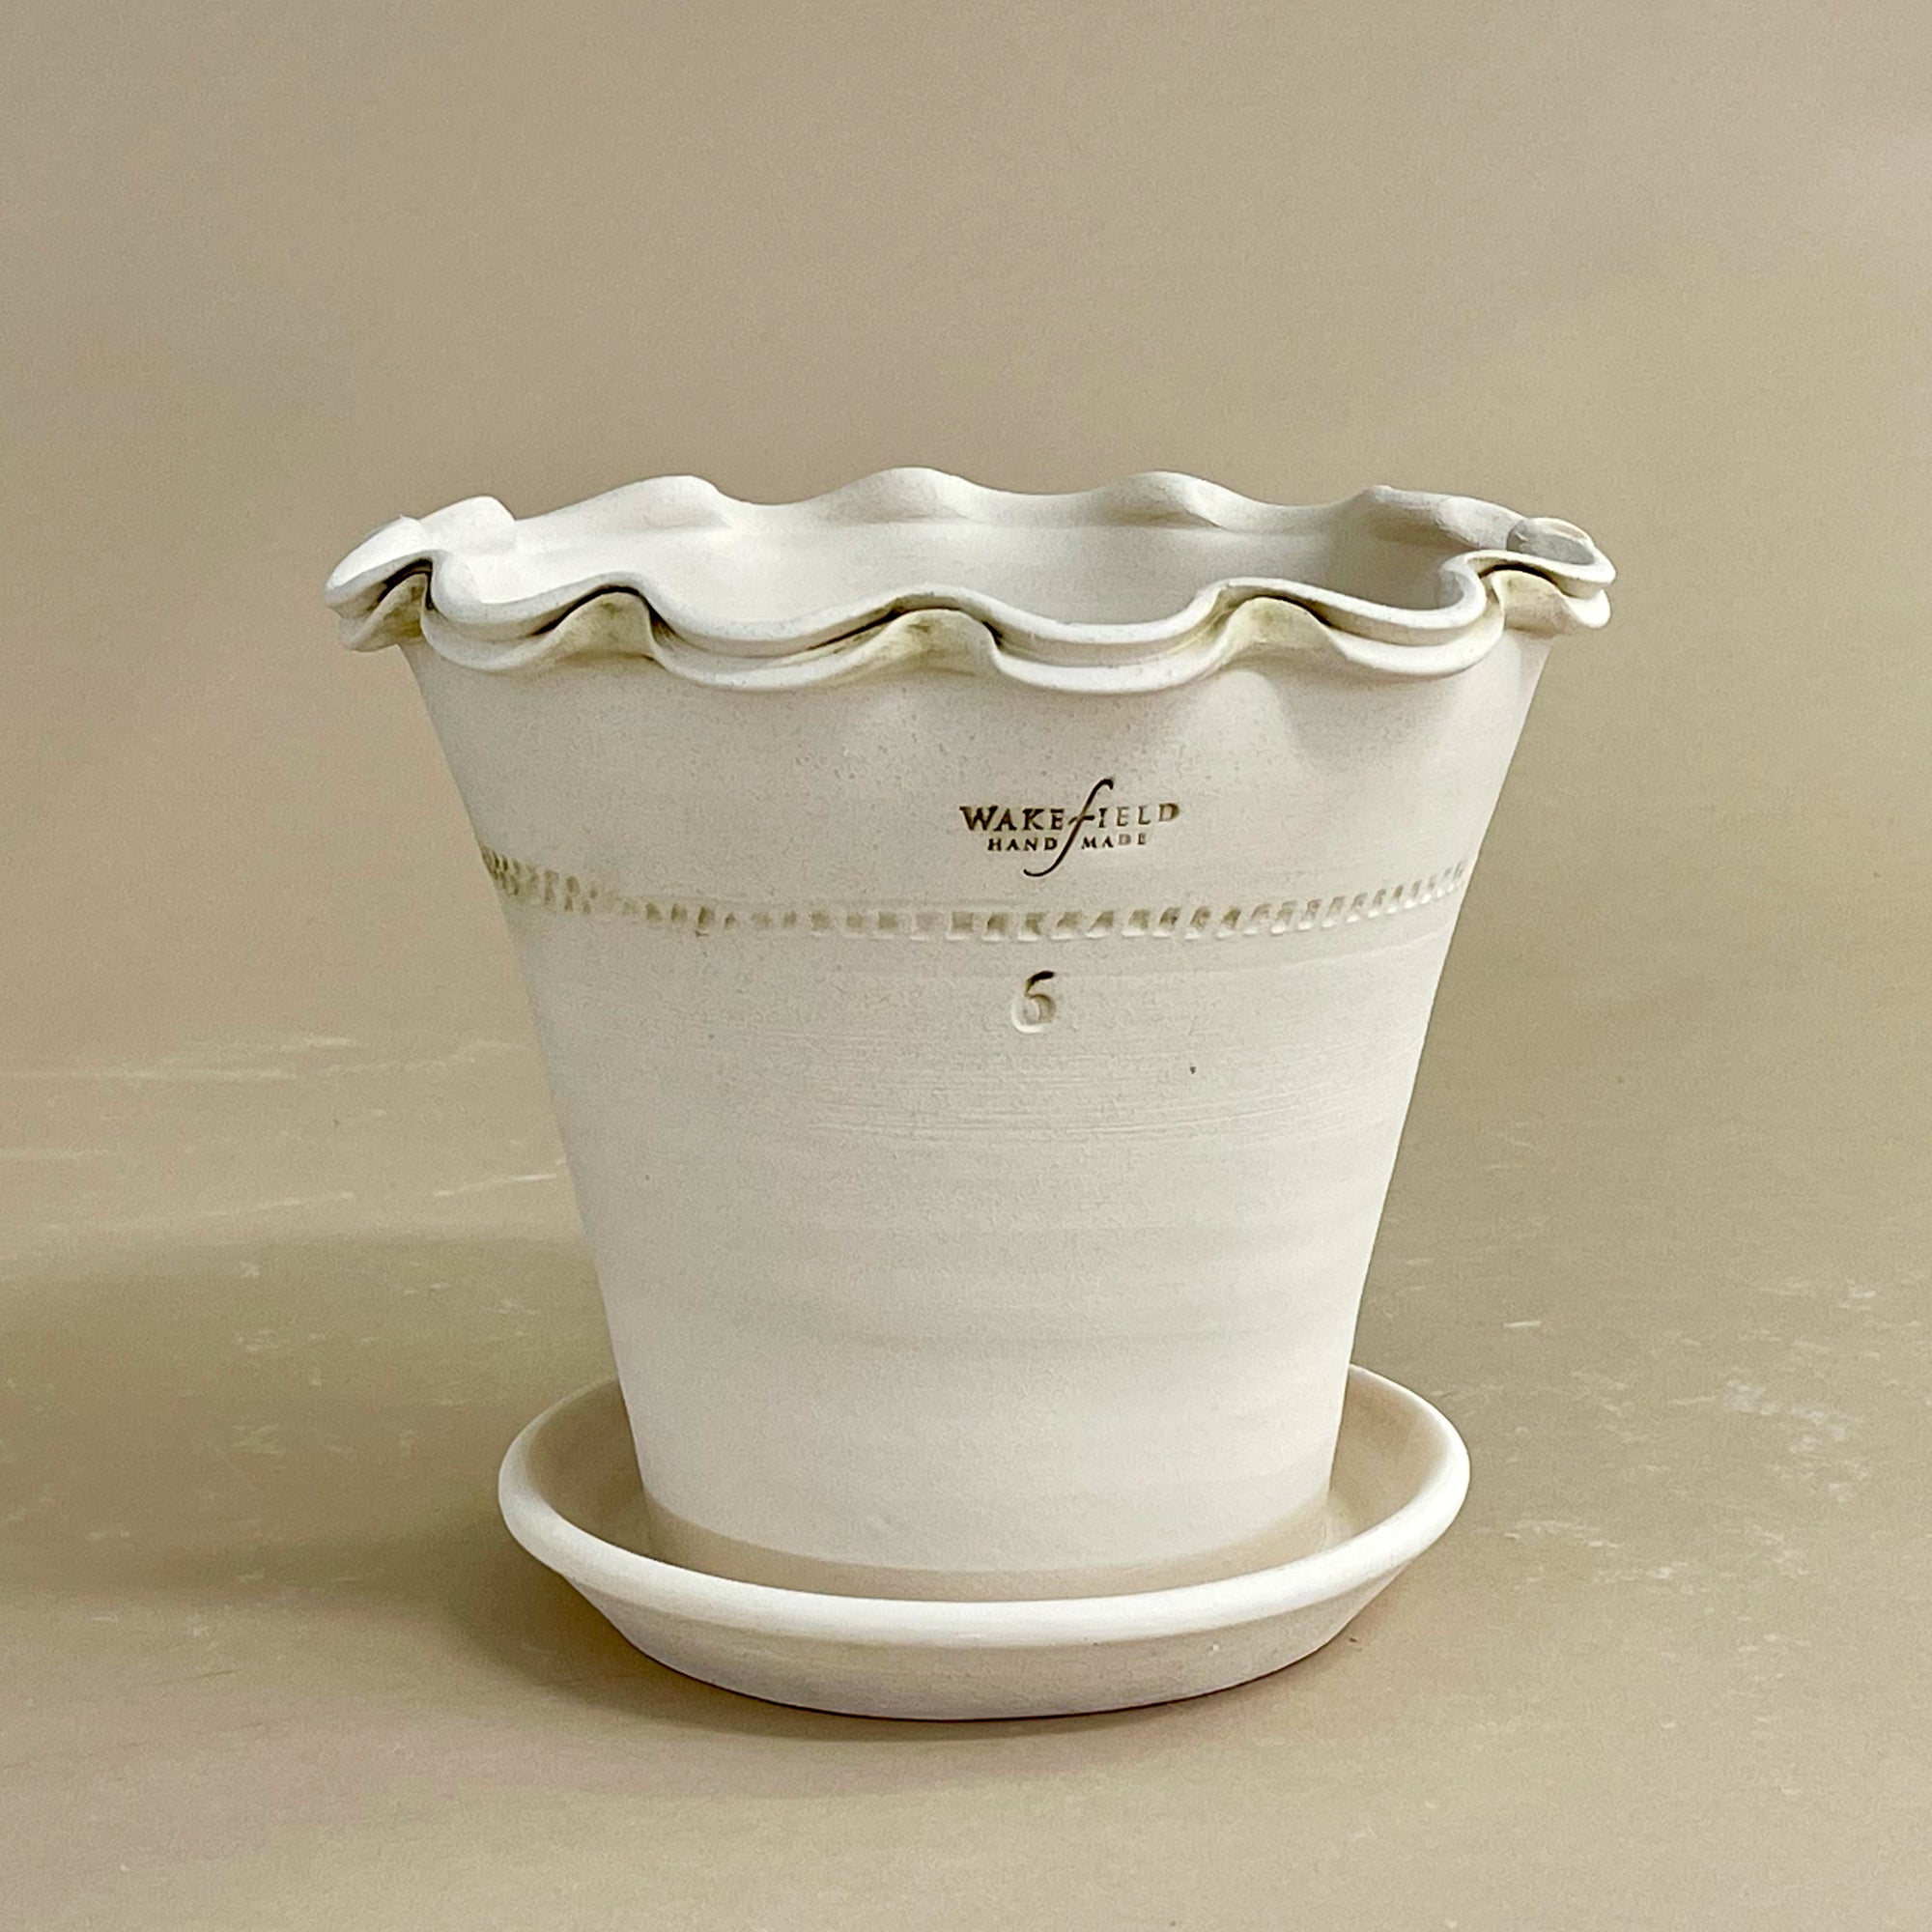 Split Rim Scalloped Full Pot with Attached Saucer